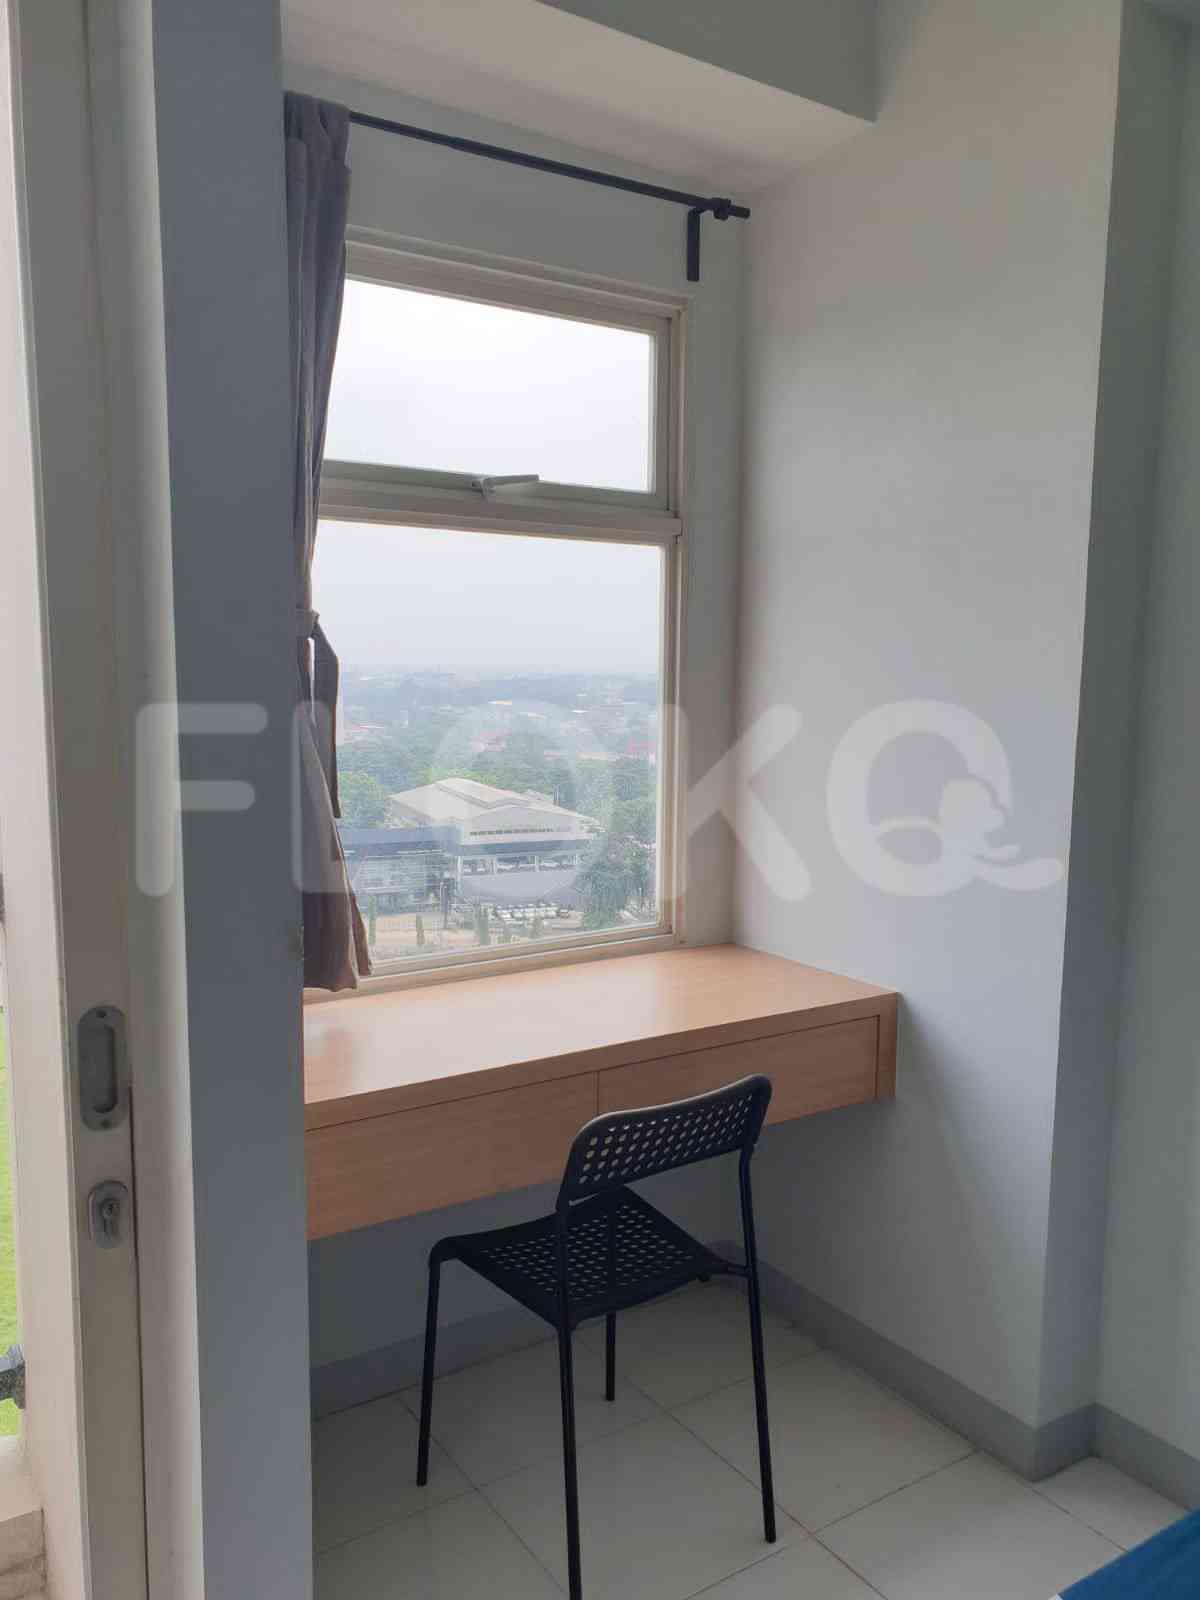 1 Bedroom on 17th Floor for Rent in Kota Ayodhya Apartment - fci17f 1